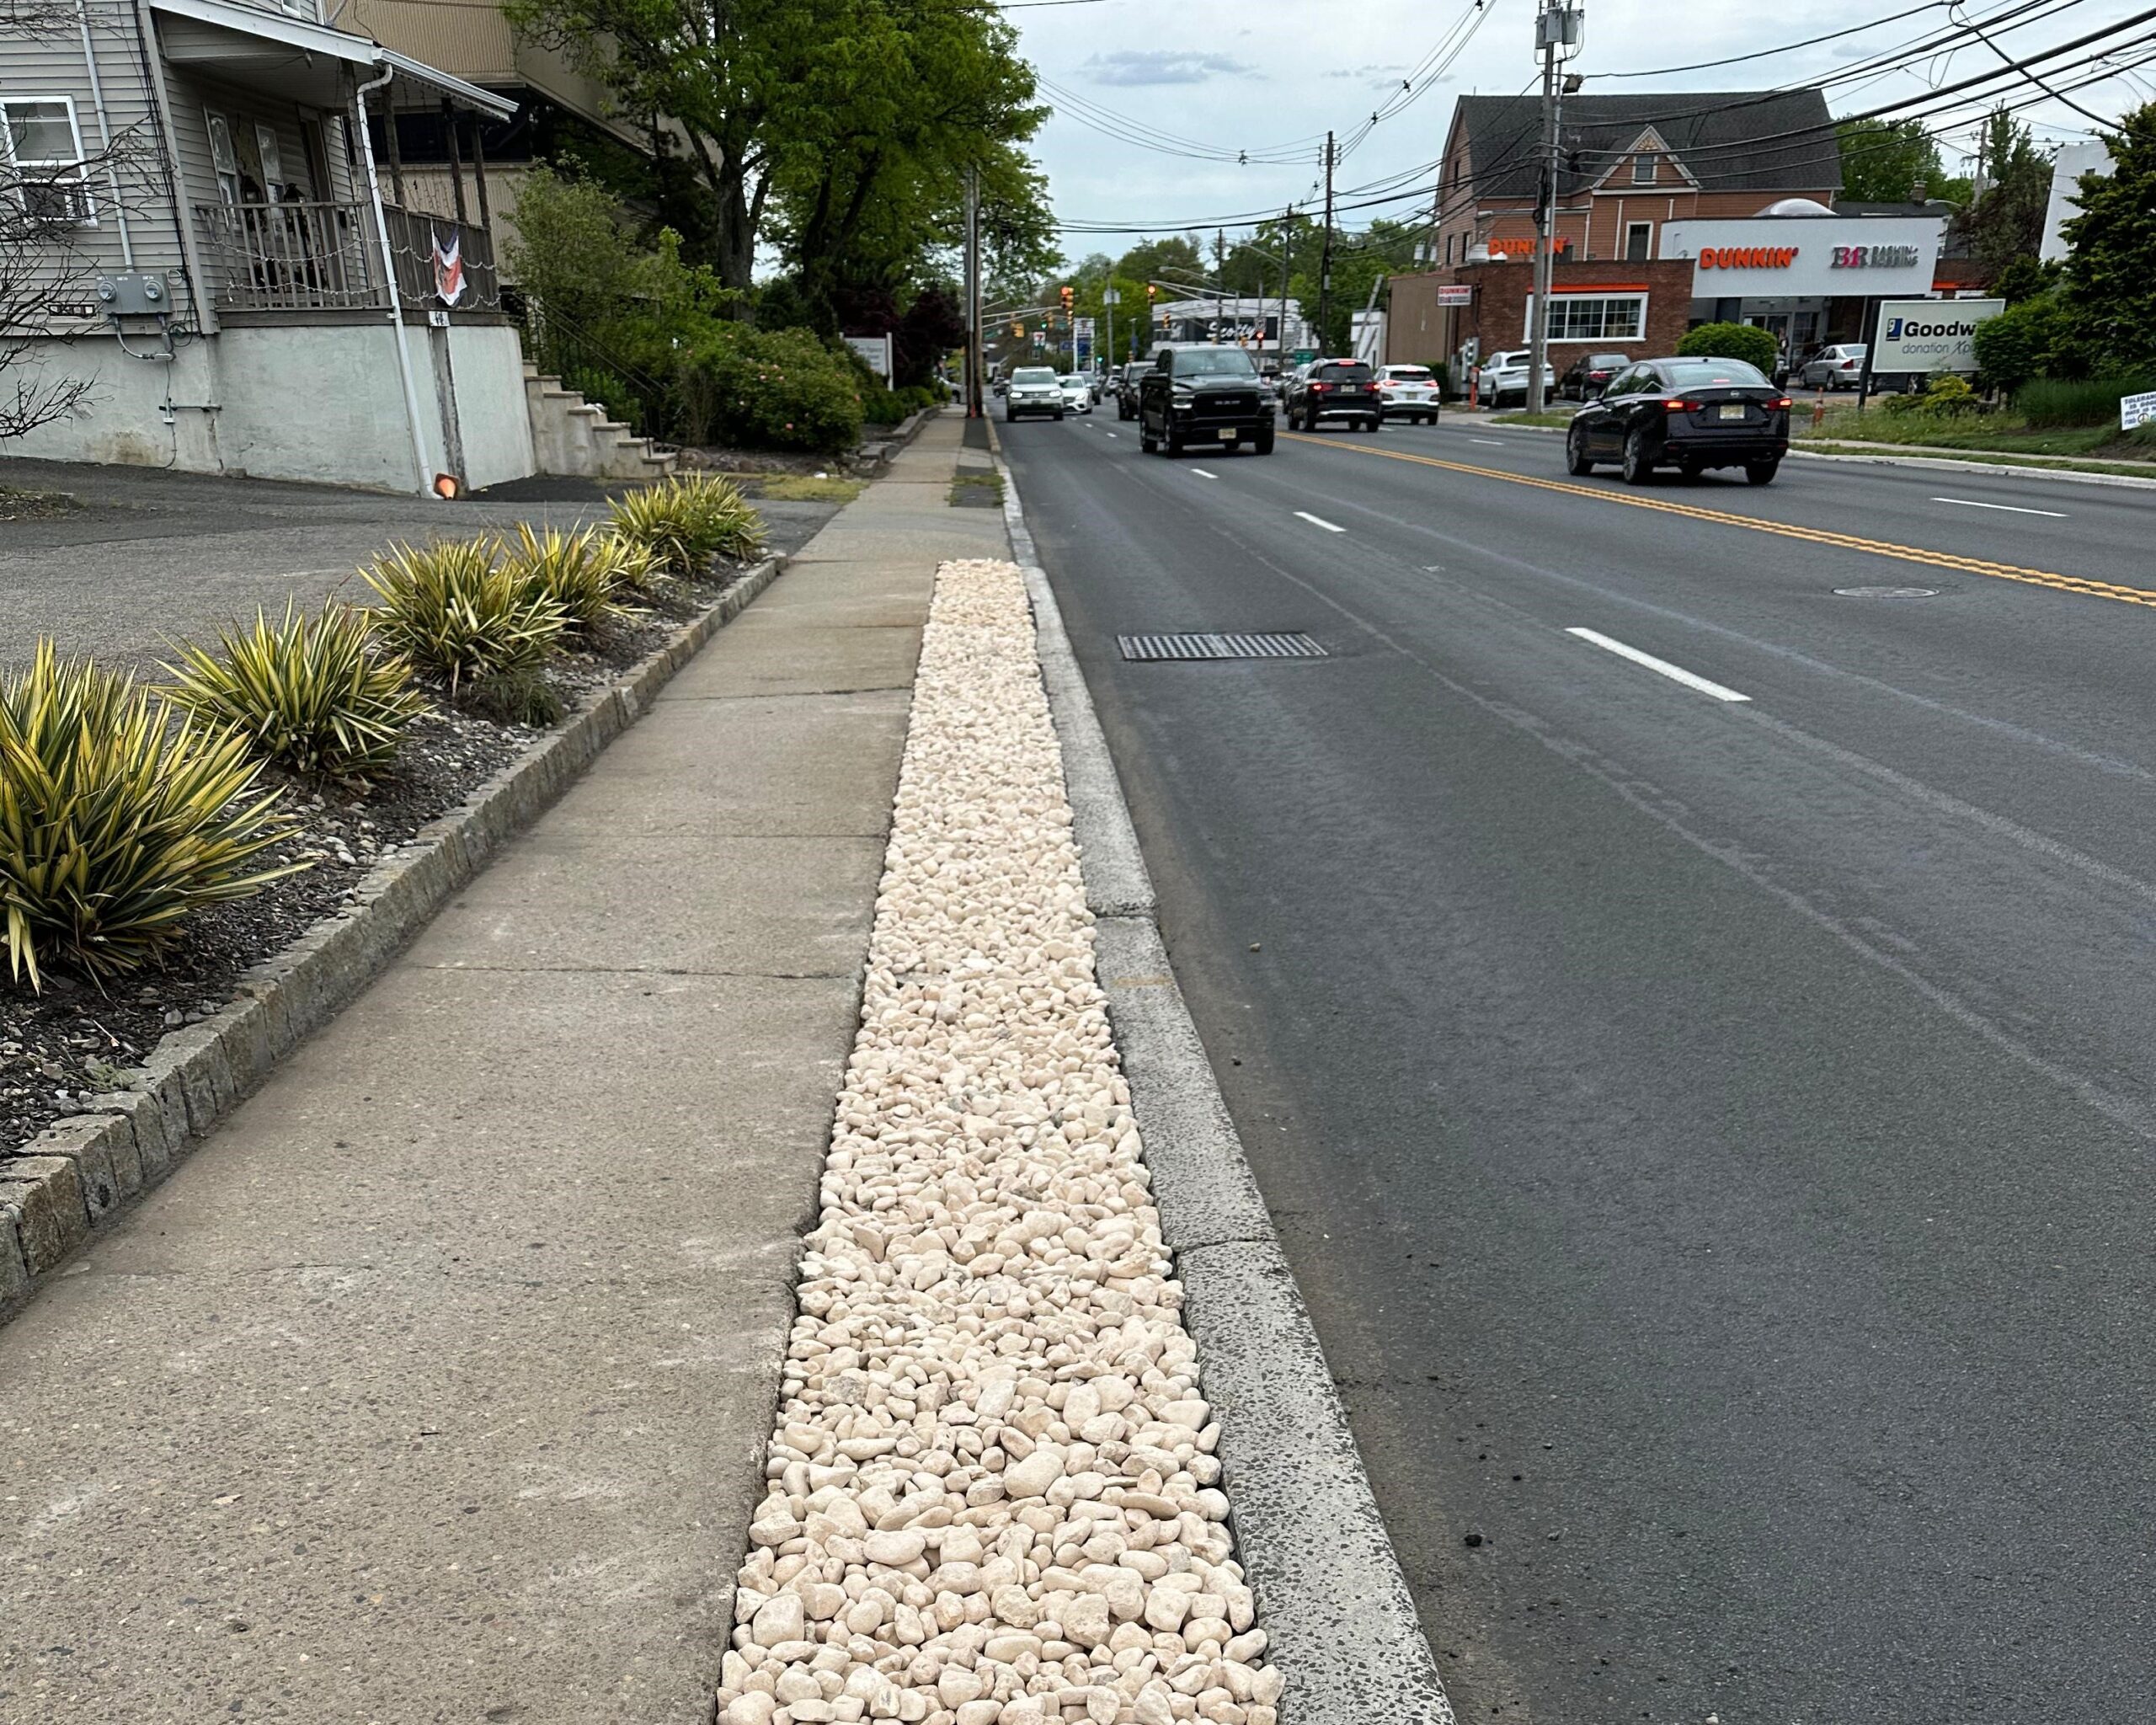 A road lined with white rocks filled with clarkes professional